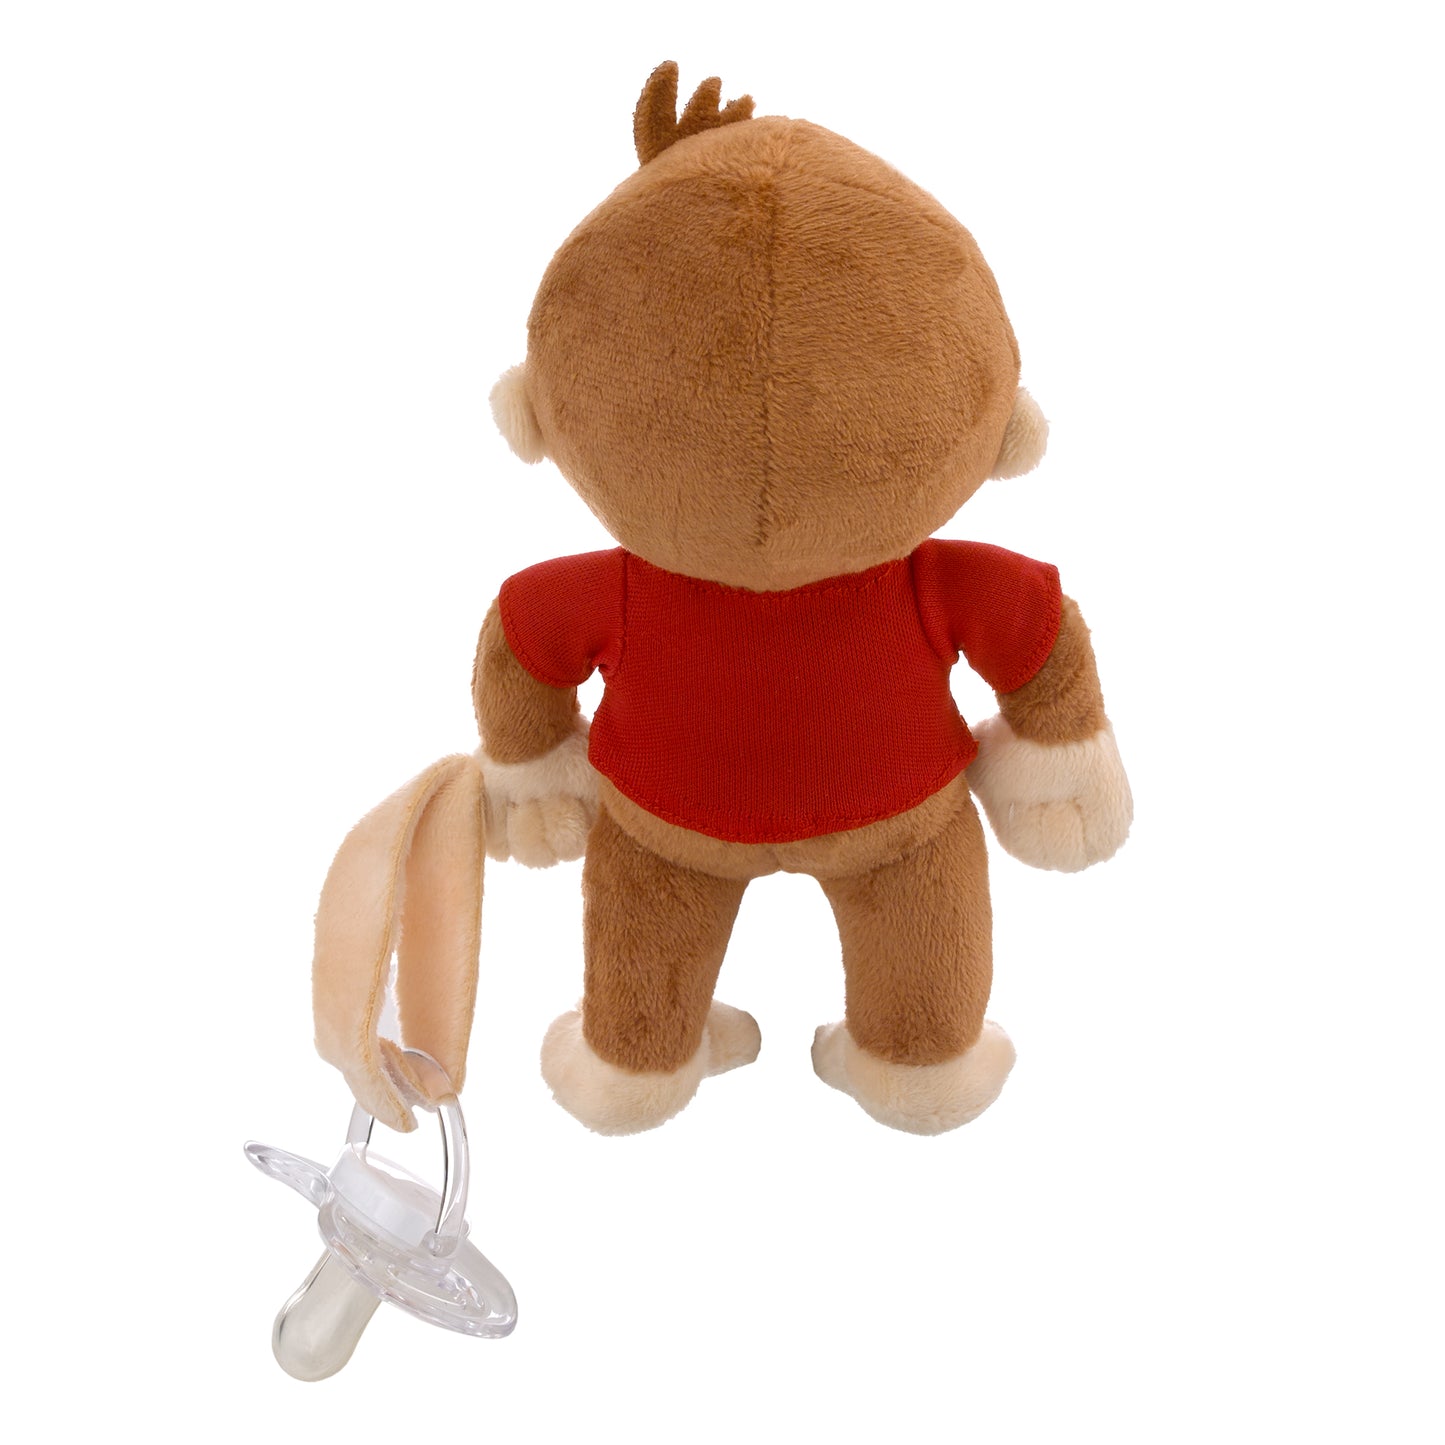 Welcome to the Universe Baby Curious George Brown, Red and Yellow Plush Pacifier Buddy